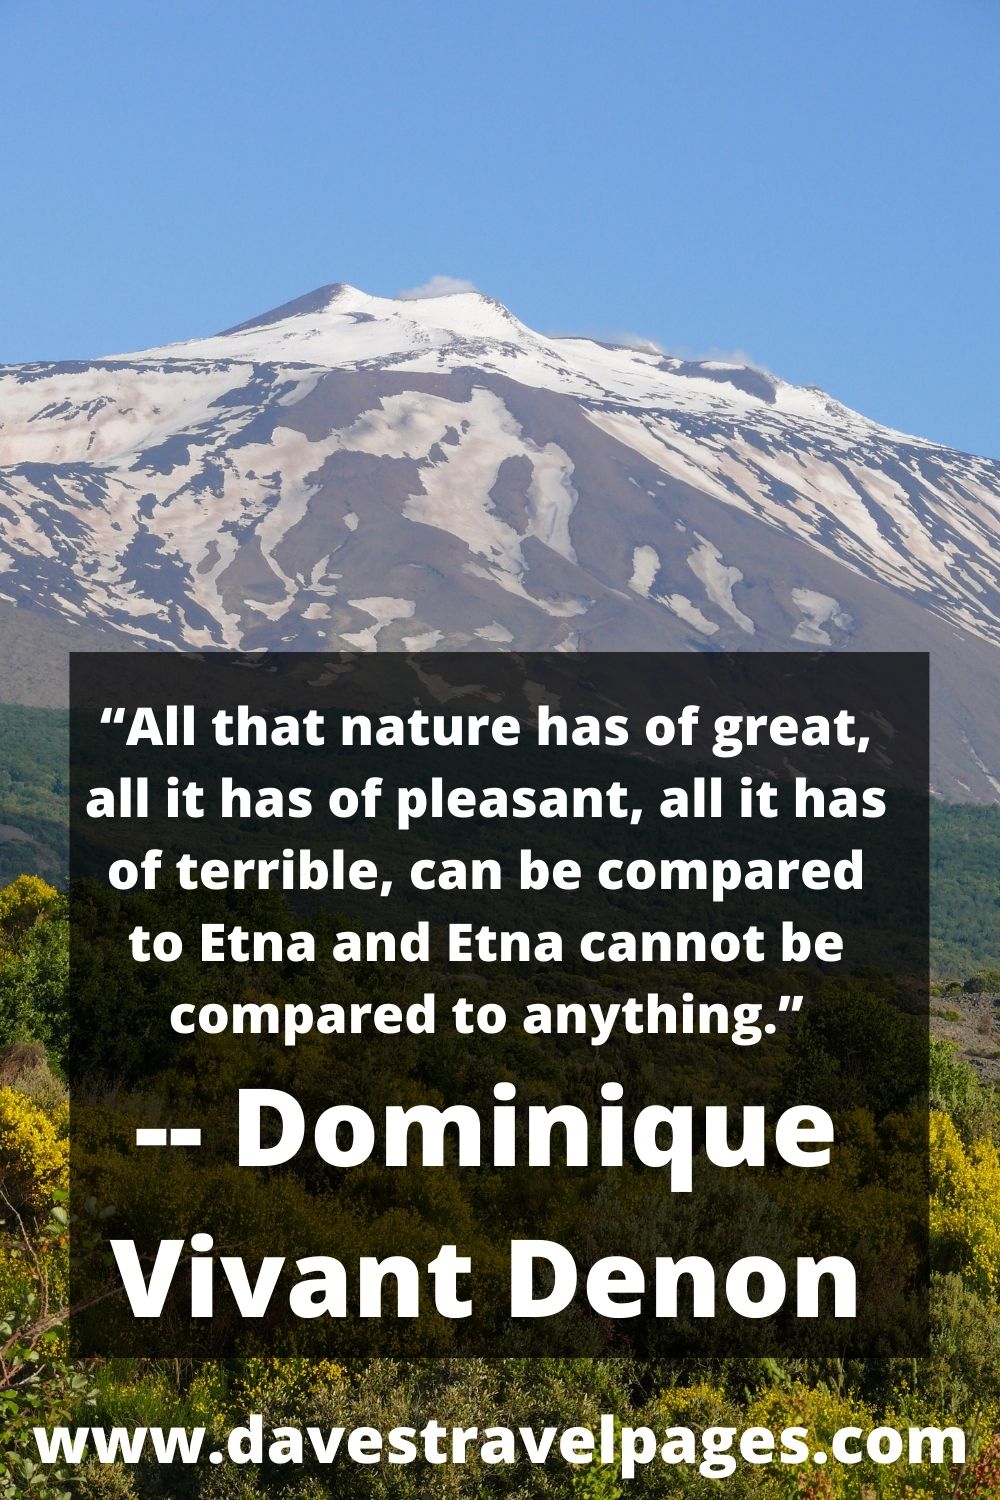 “All that nature has of great, all it has of pleasant, all it has of terrible, can be compared to Etna and Etna cannot be compared to anything.” -- Dominique Vivant Denon